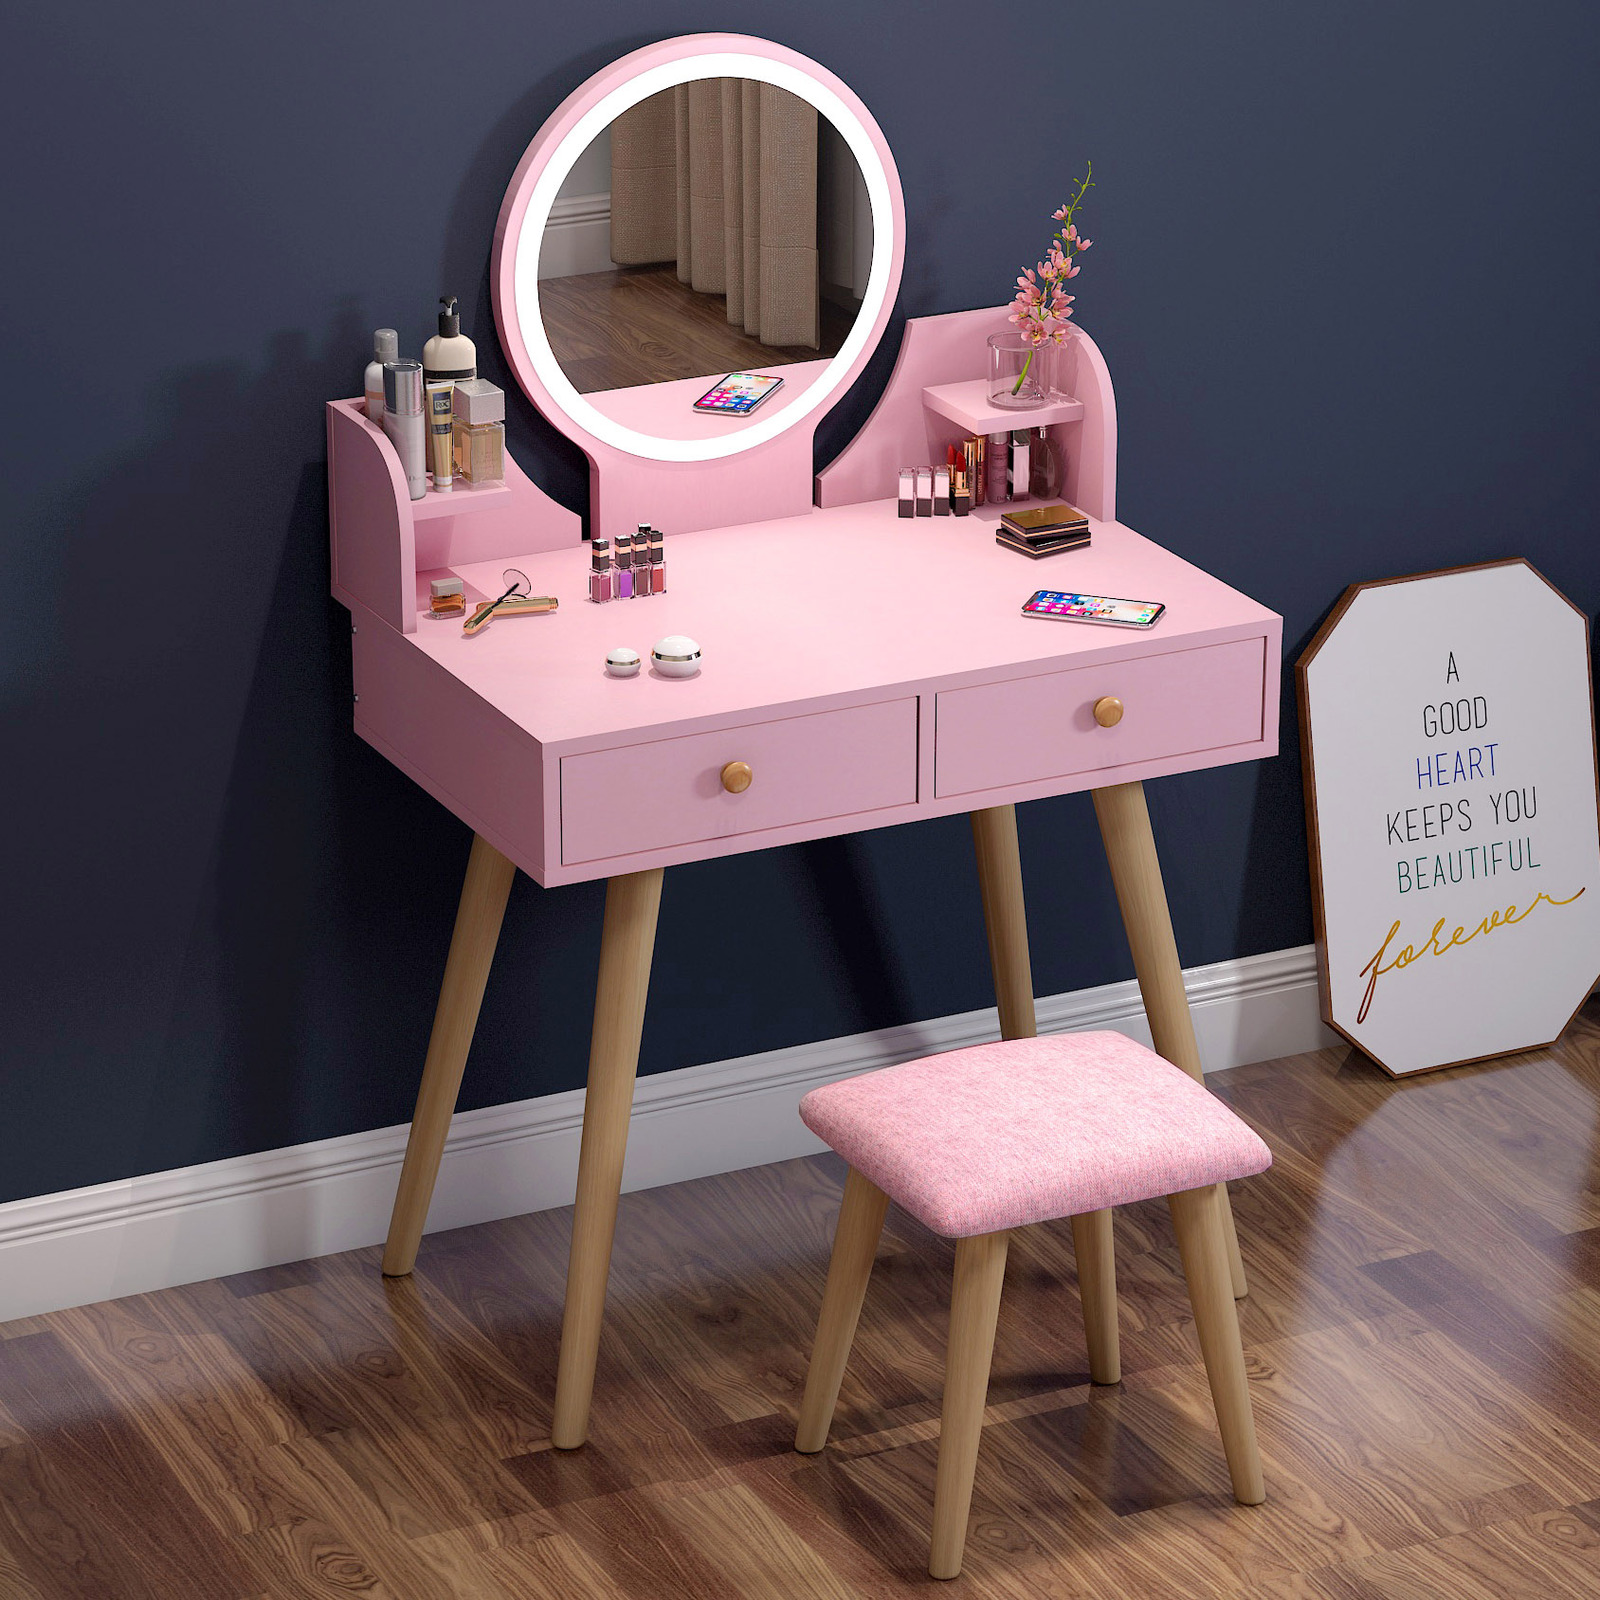 LED Luminous Princess Dresser Vanity Table with Mirror, Stool and Storage Drawers Set (Pink)